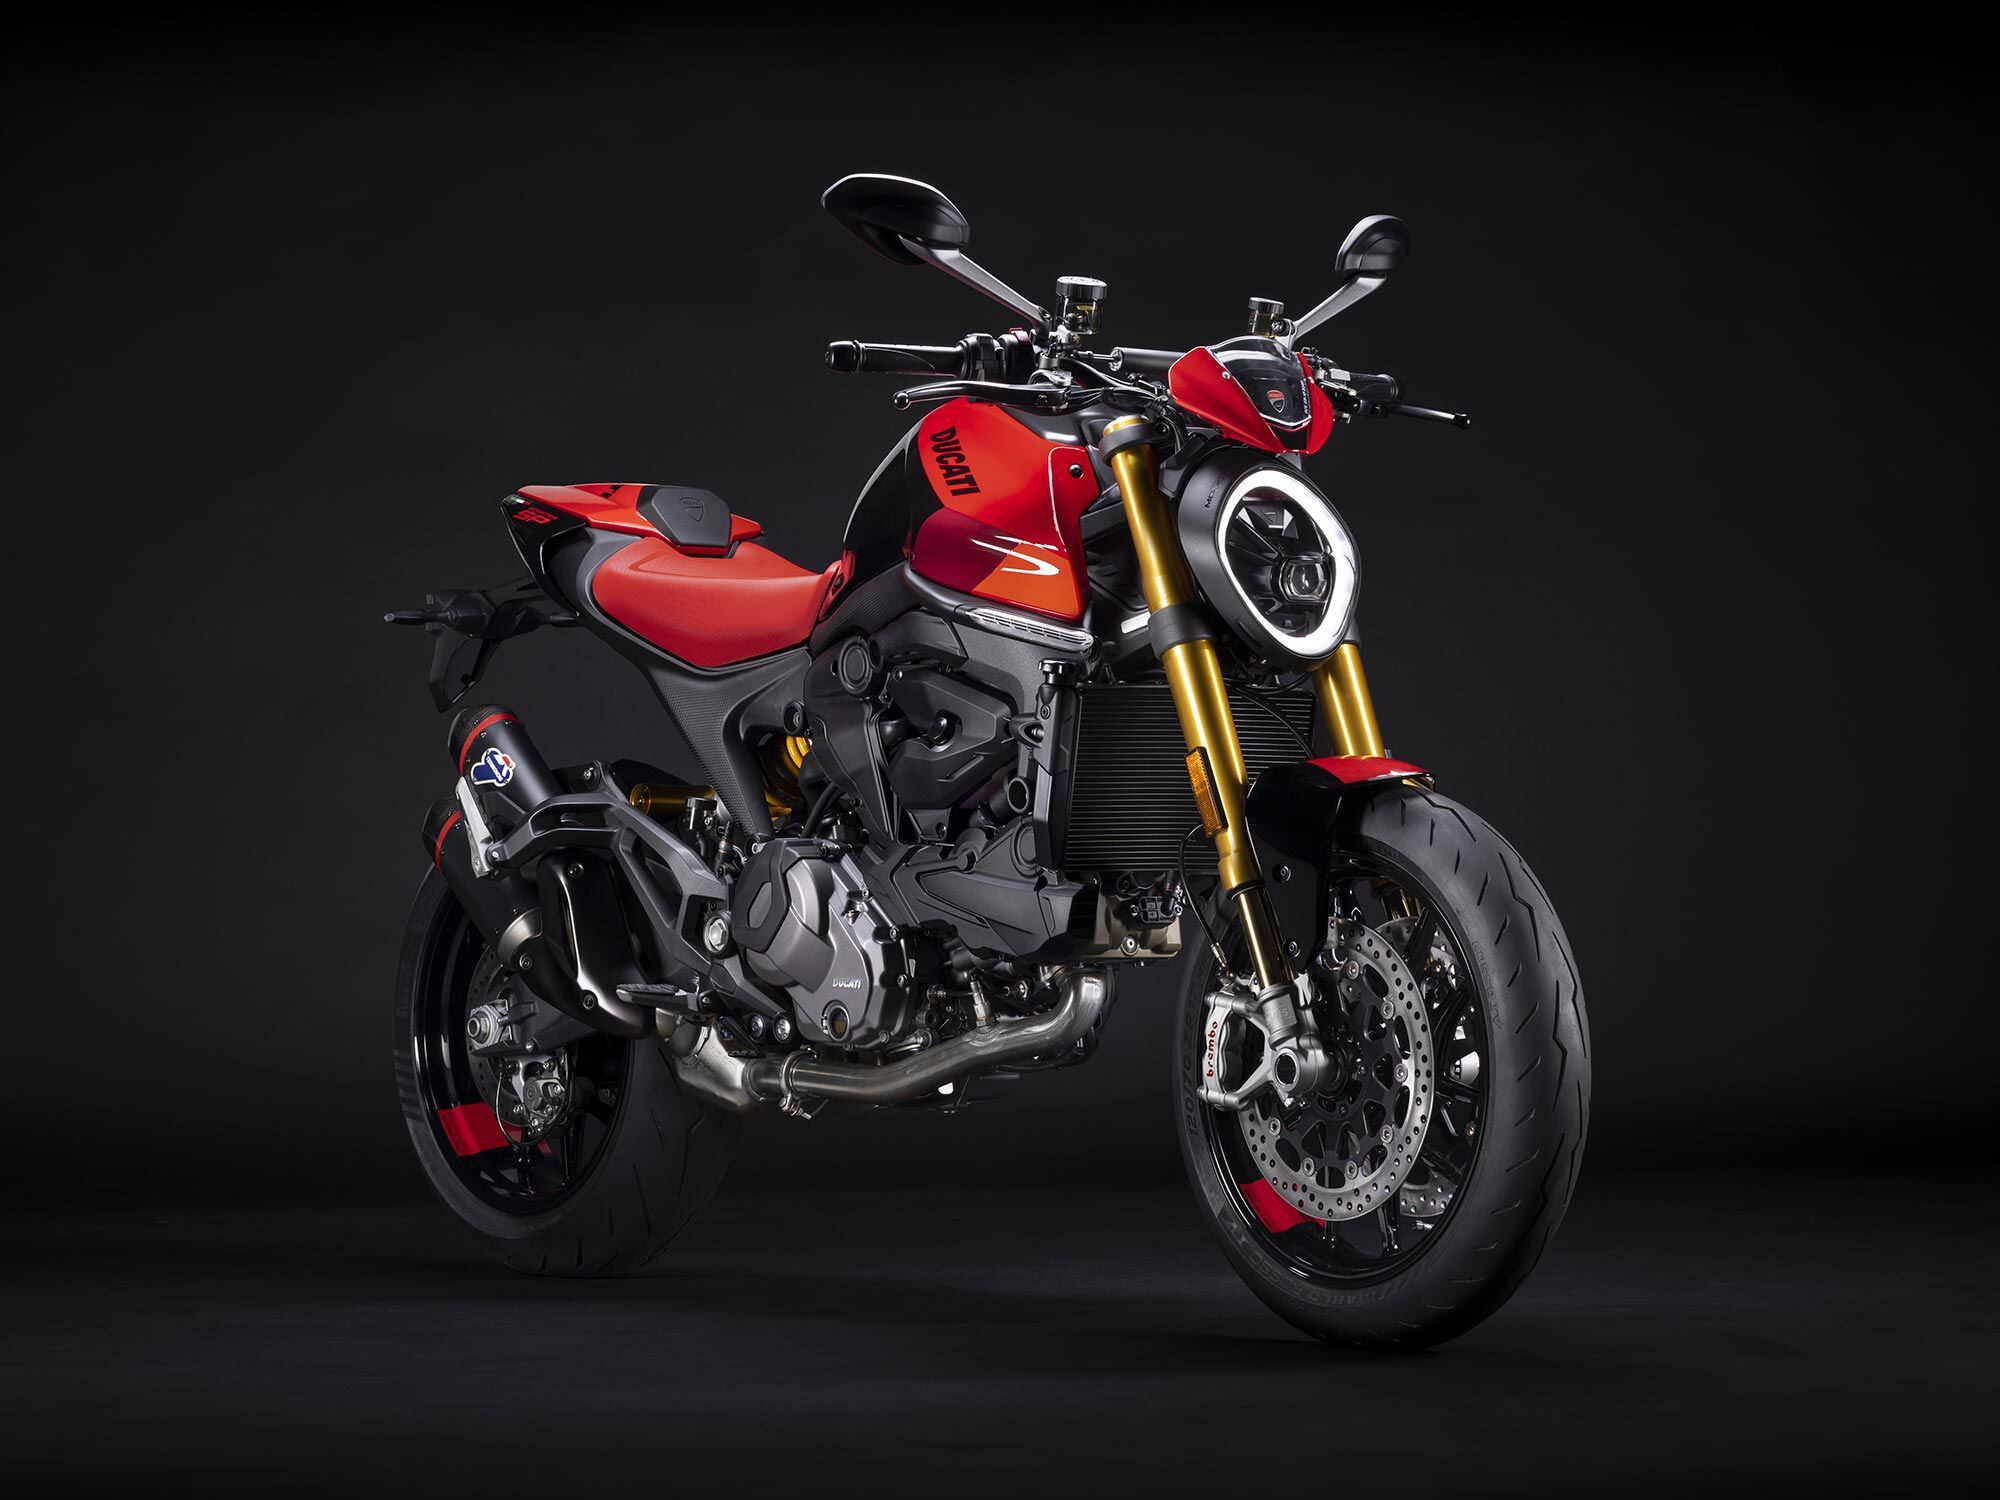 The new Ducati Monster SP takes the latest-generation Monster, adds premium brakes, suspension, and tires, and wraps it all in a paint scheme riffing off Ducati’s MotoGP team livery.